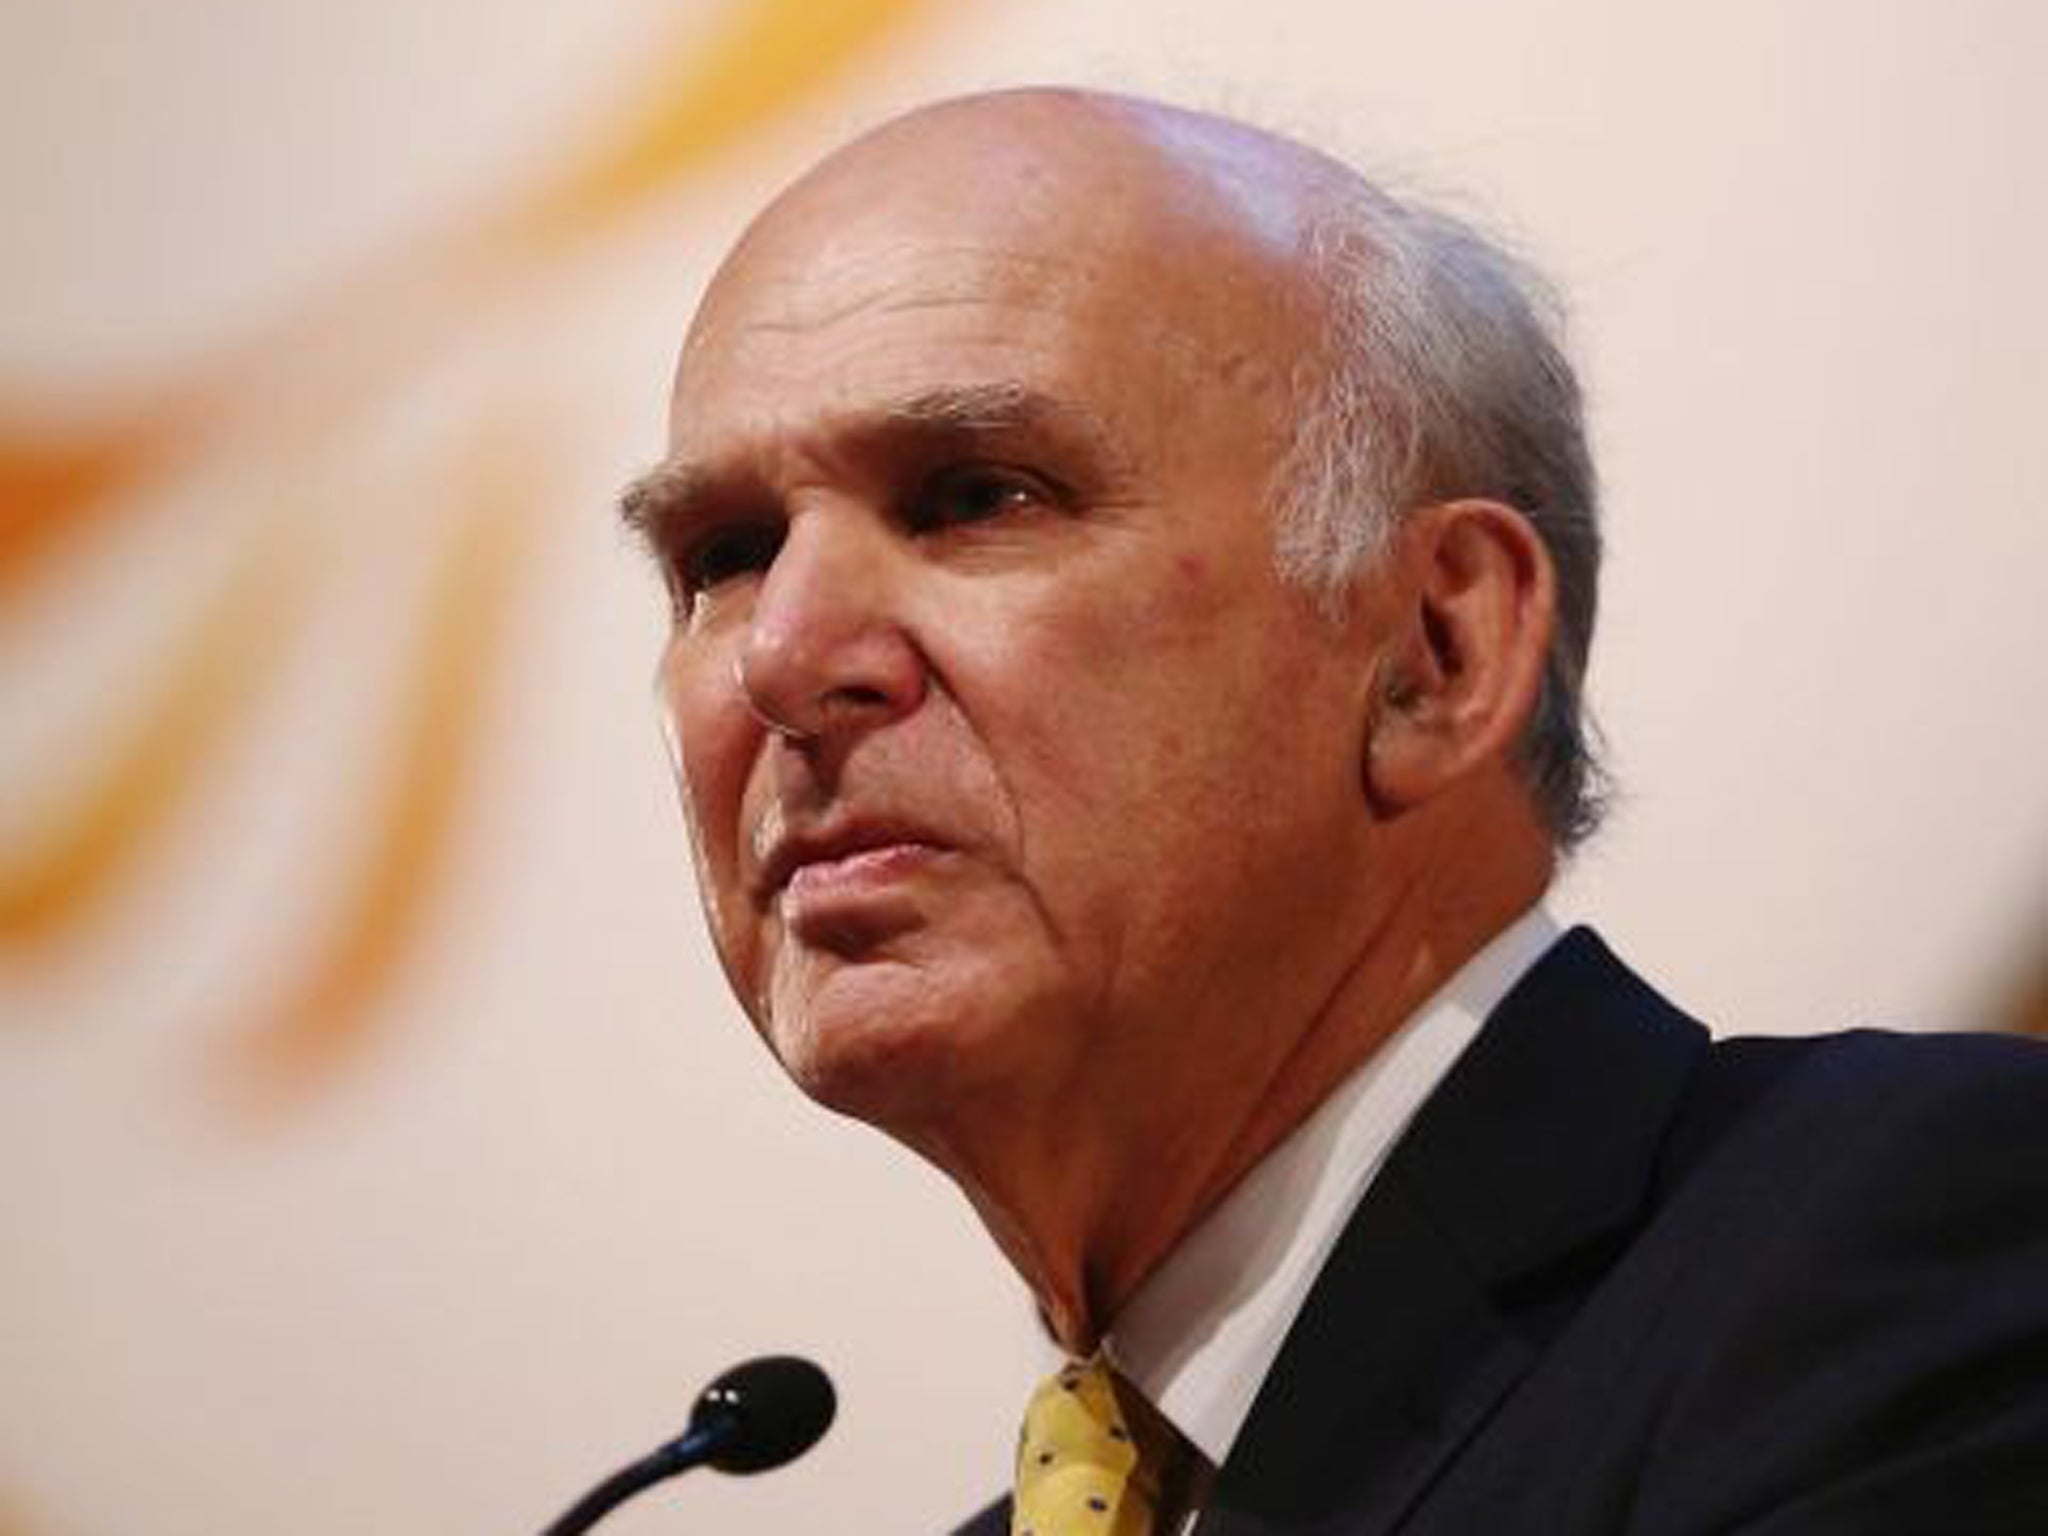 Vince Cable accused the Tories of stooping to 'dog-whistle politics' and being hostile to immigrants